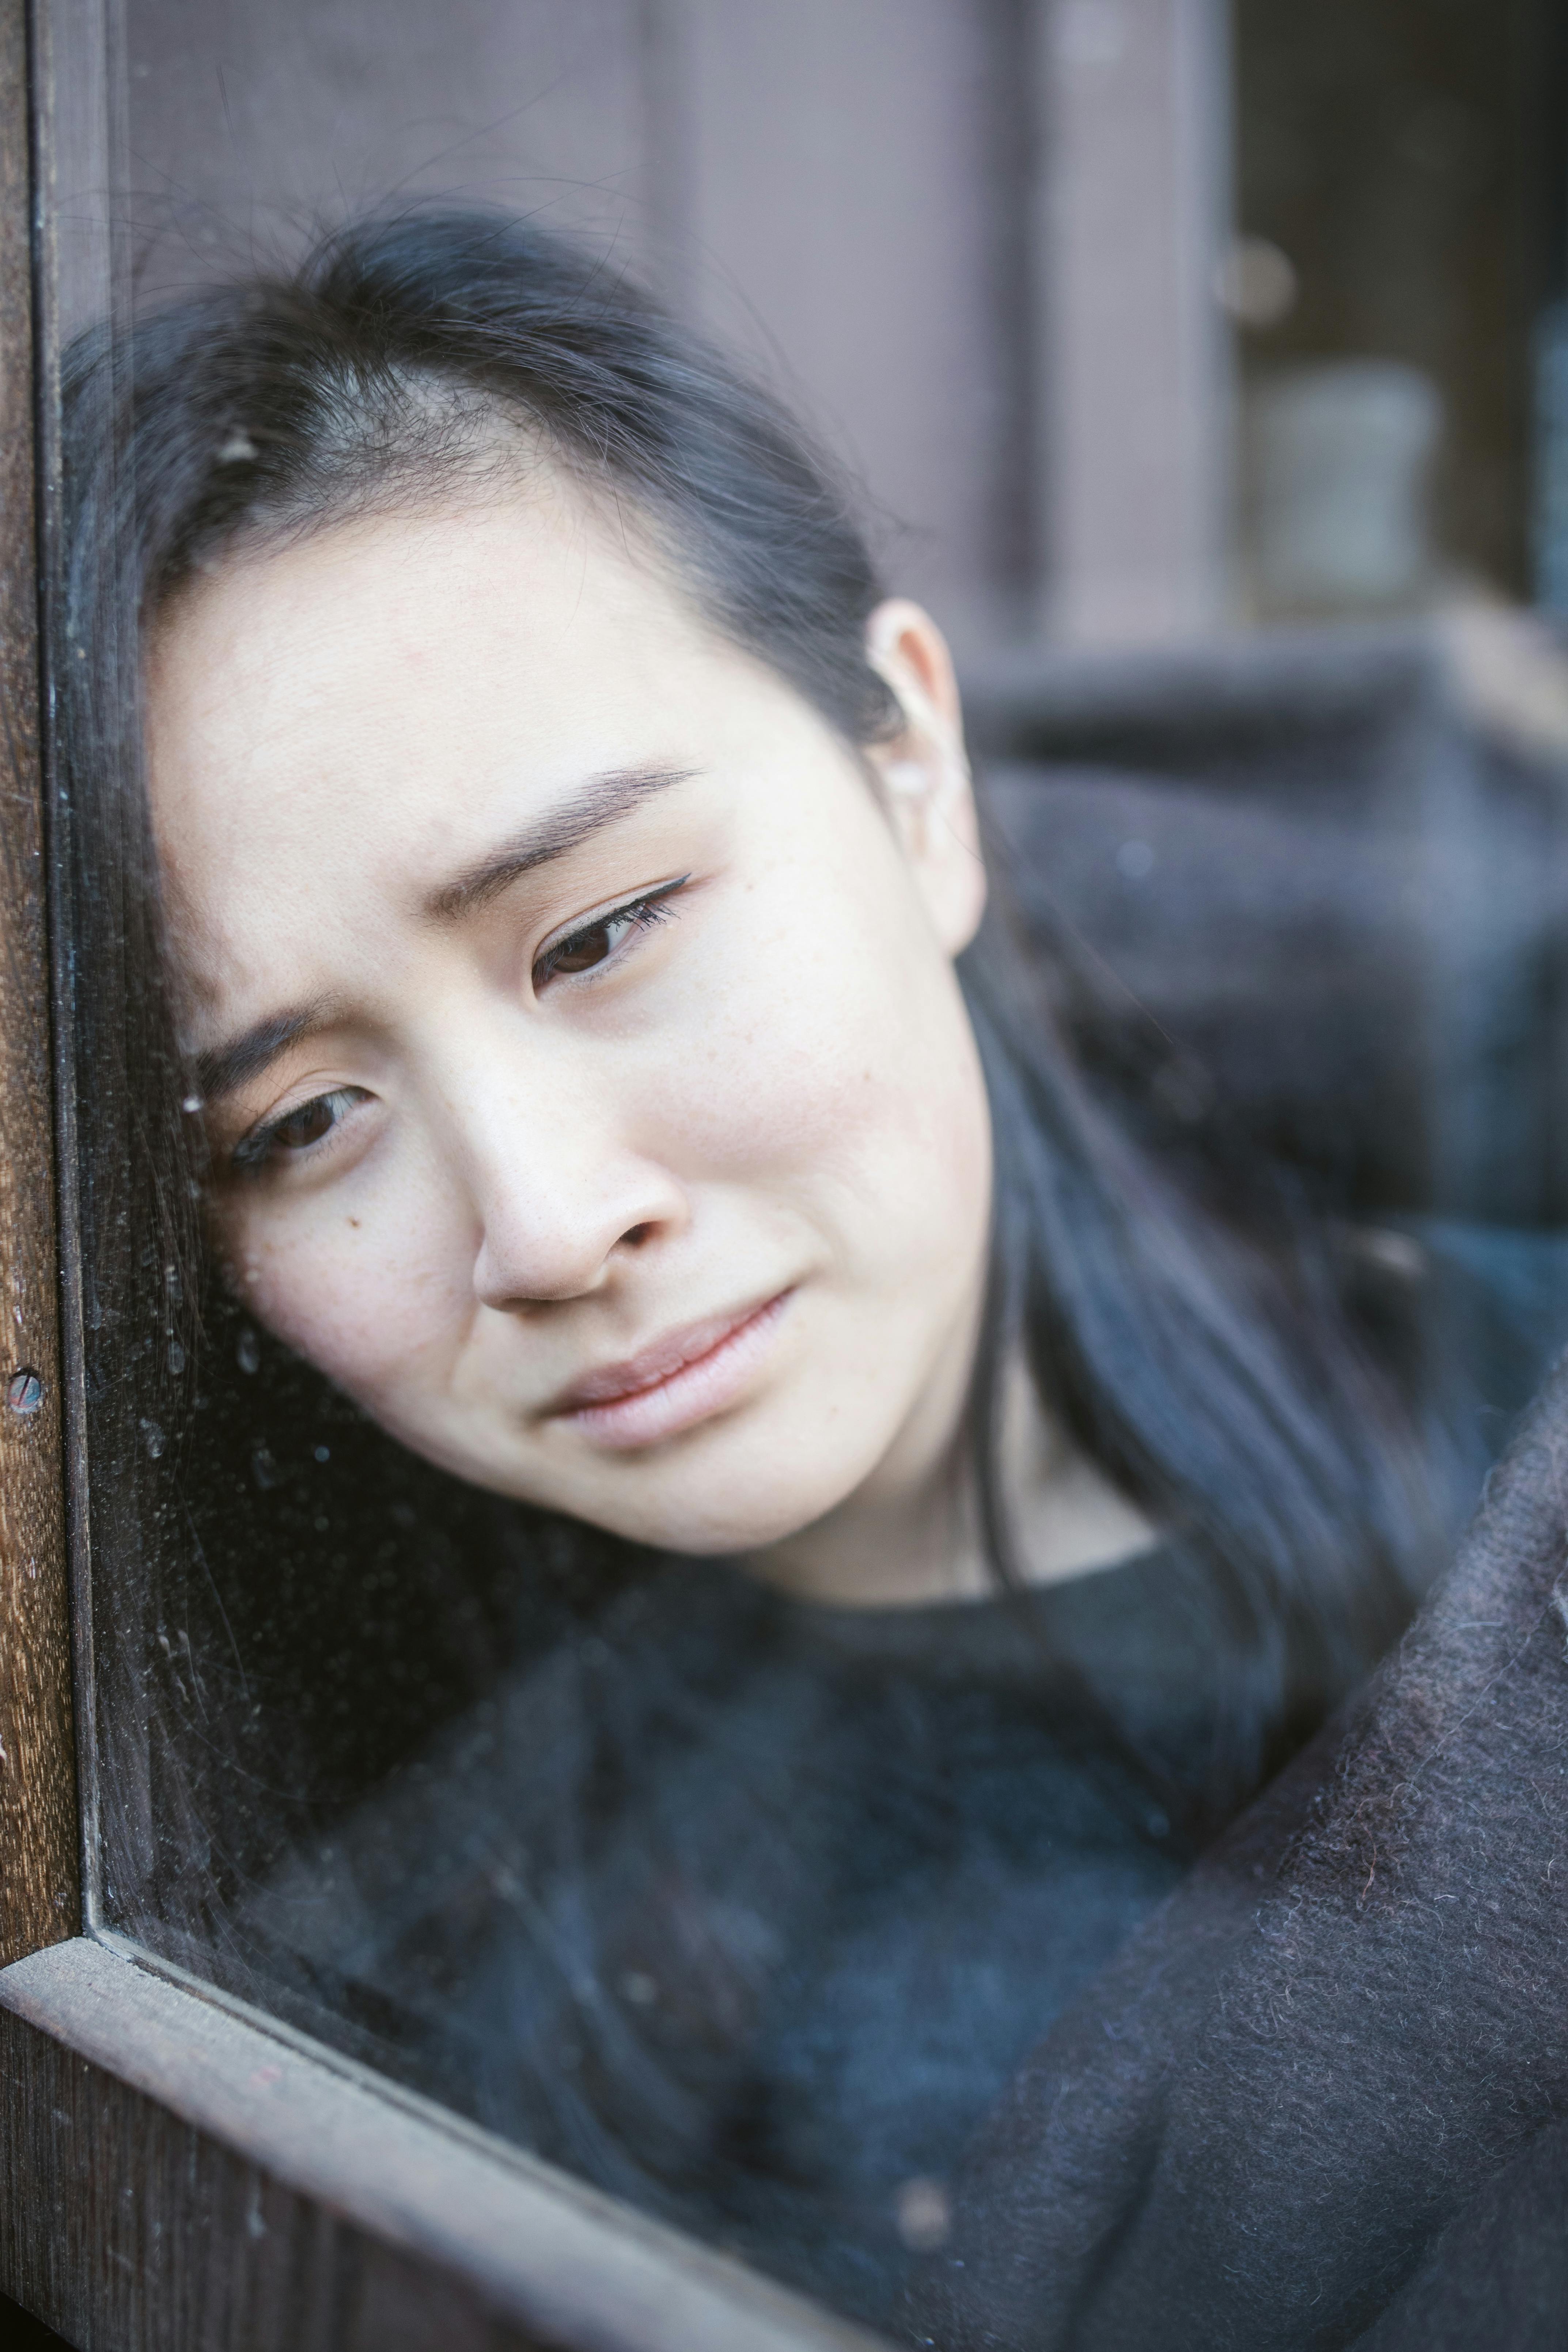 A sad woman looking out a window | Source: Pexels